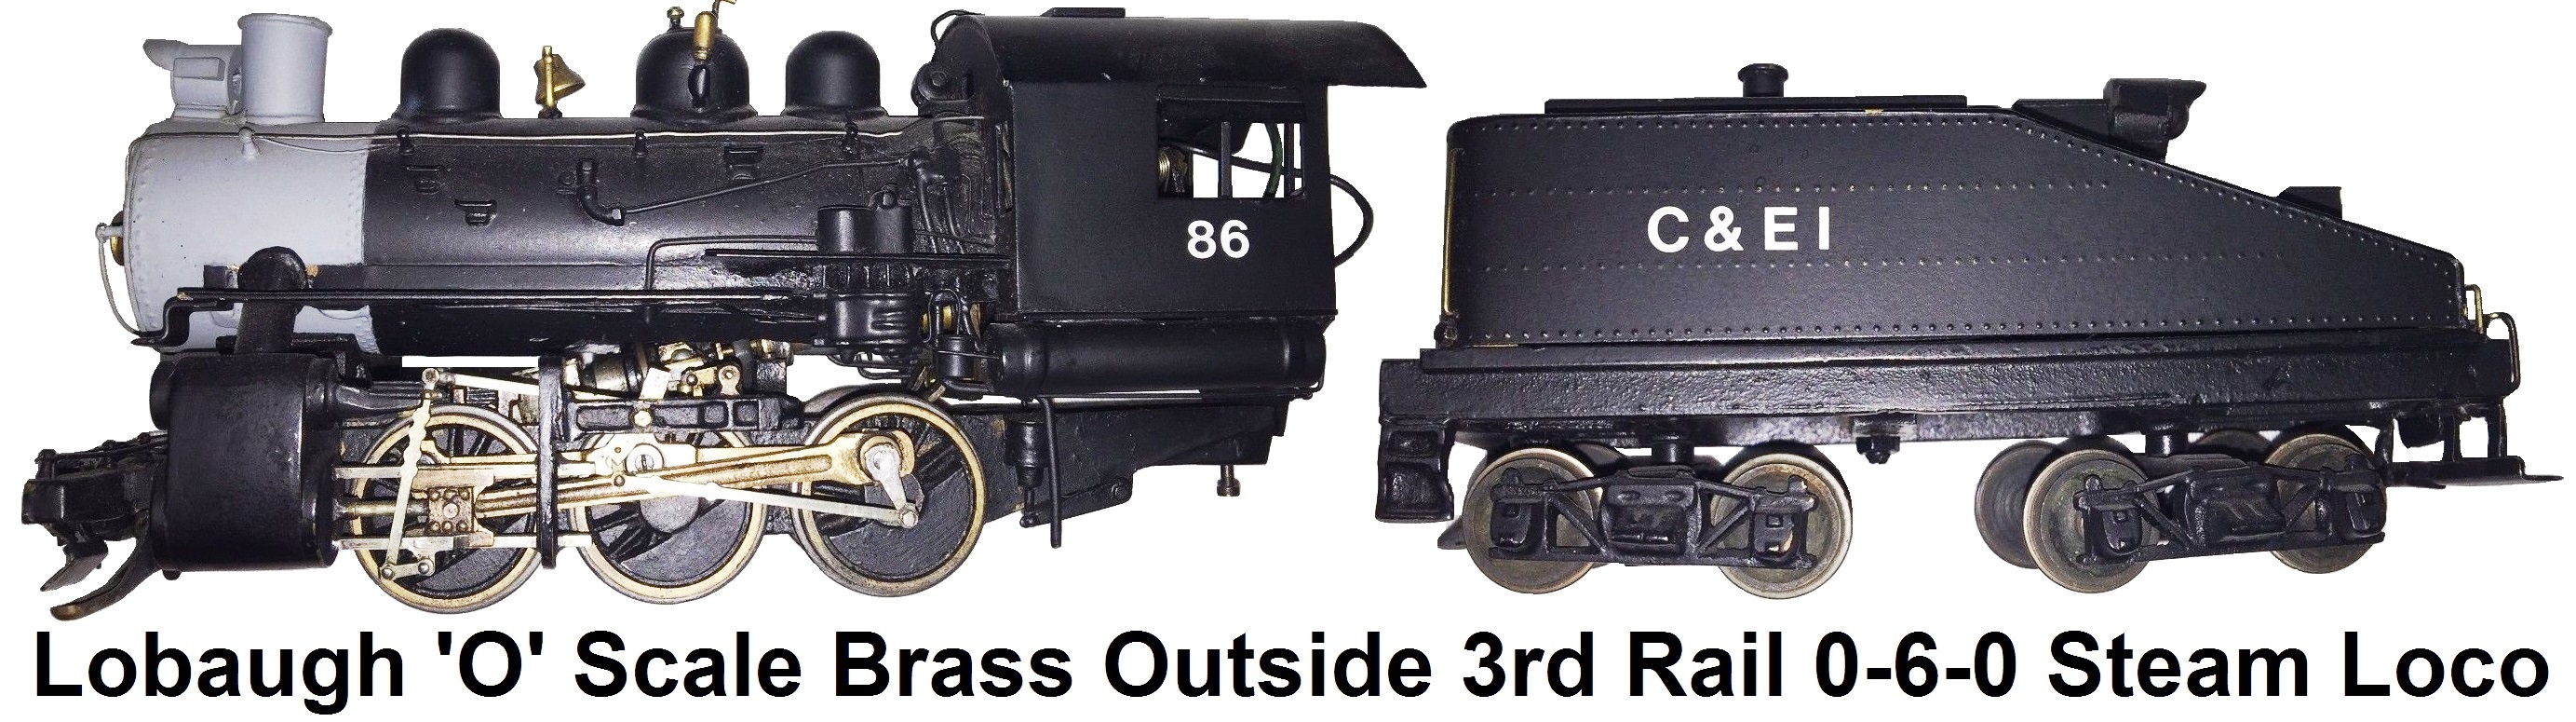 Lobaugh 'O' scale Brass 0-6-0 Switcher loco and tender for outside 3rd rail operation